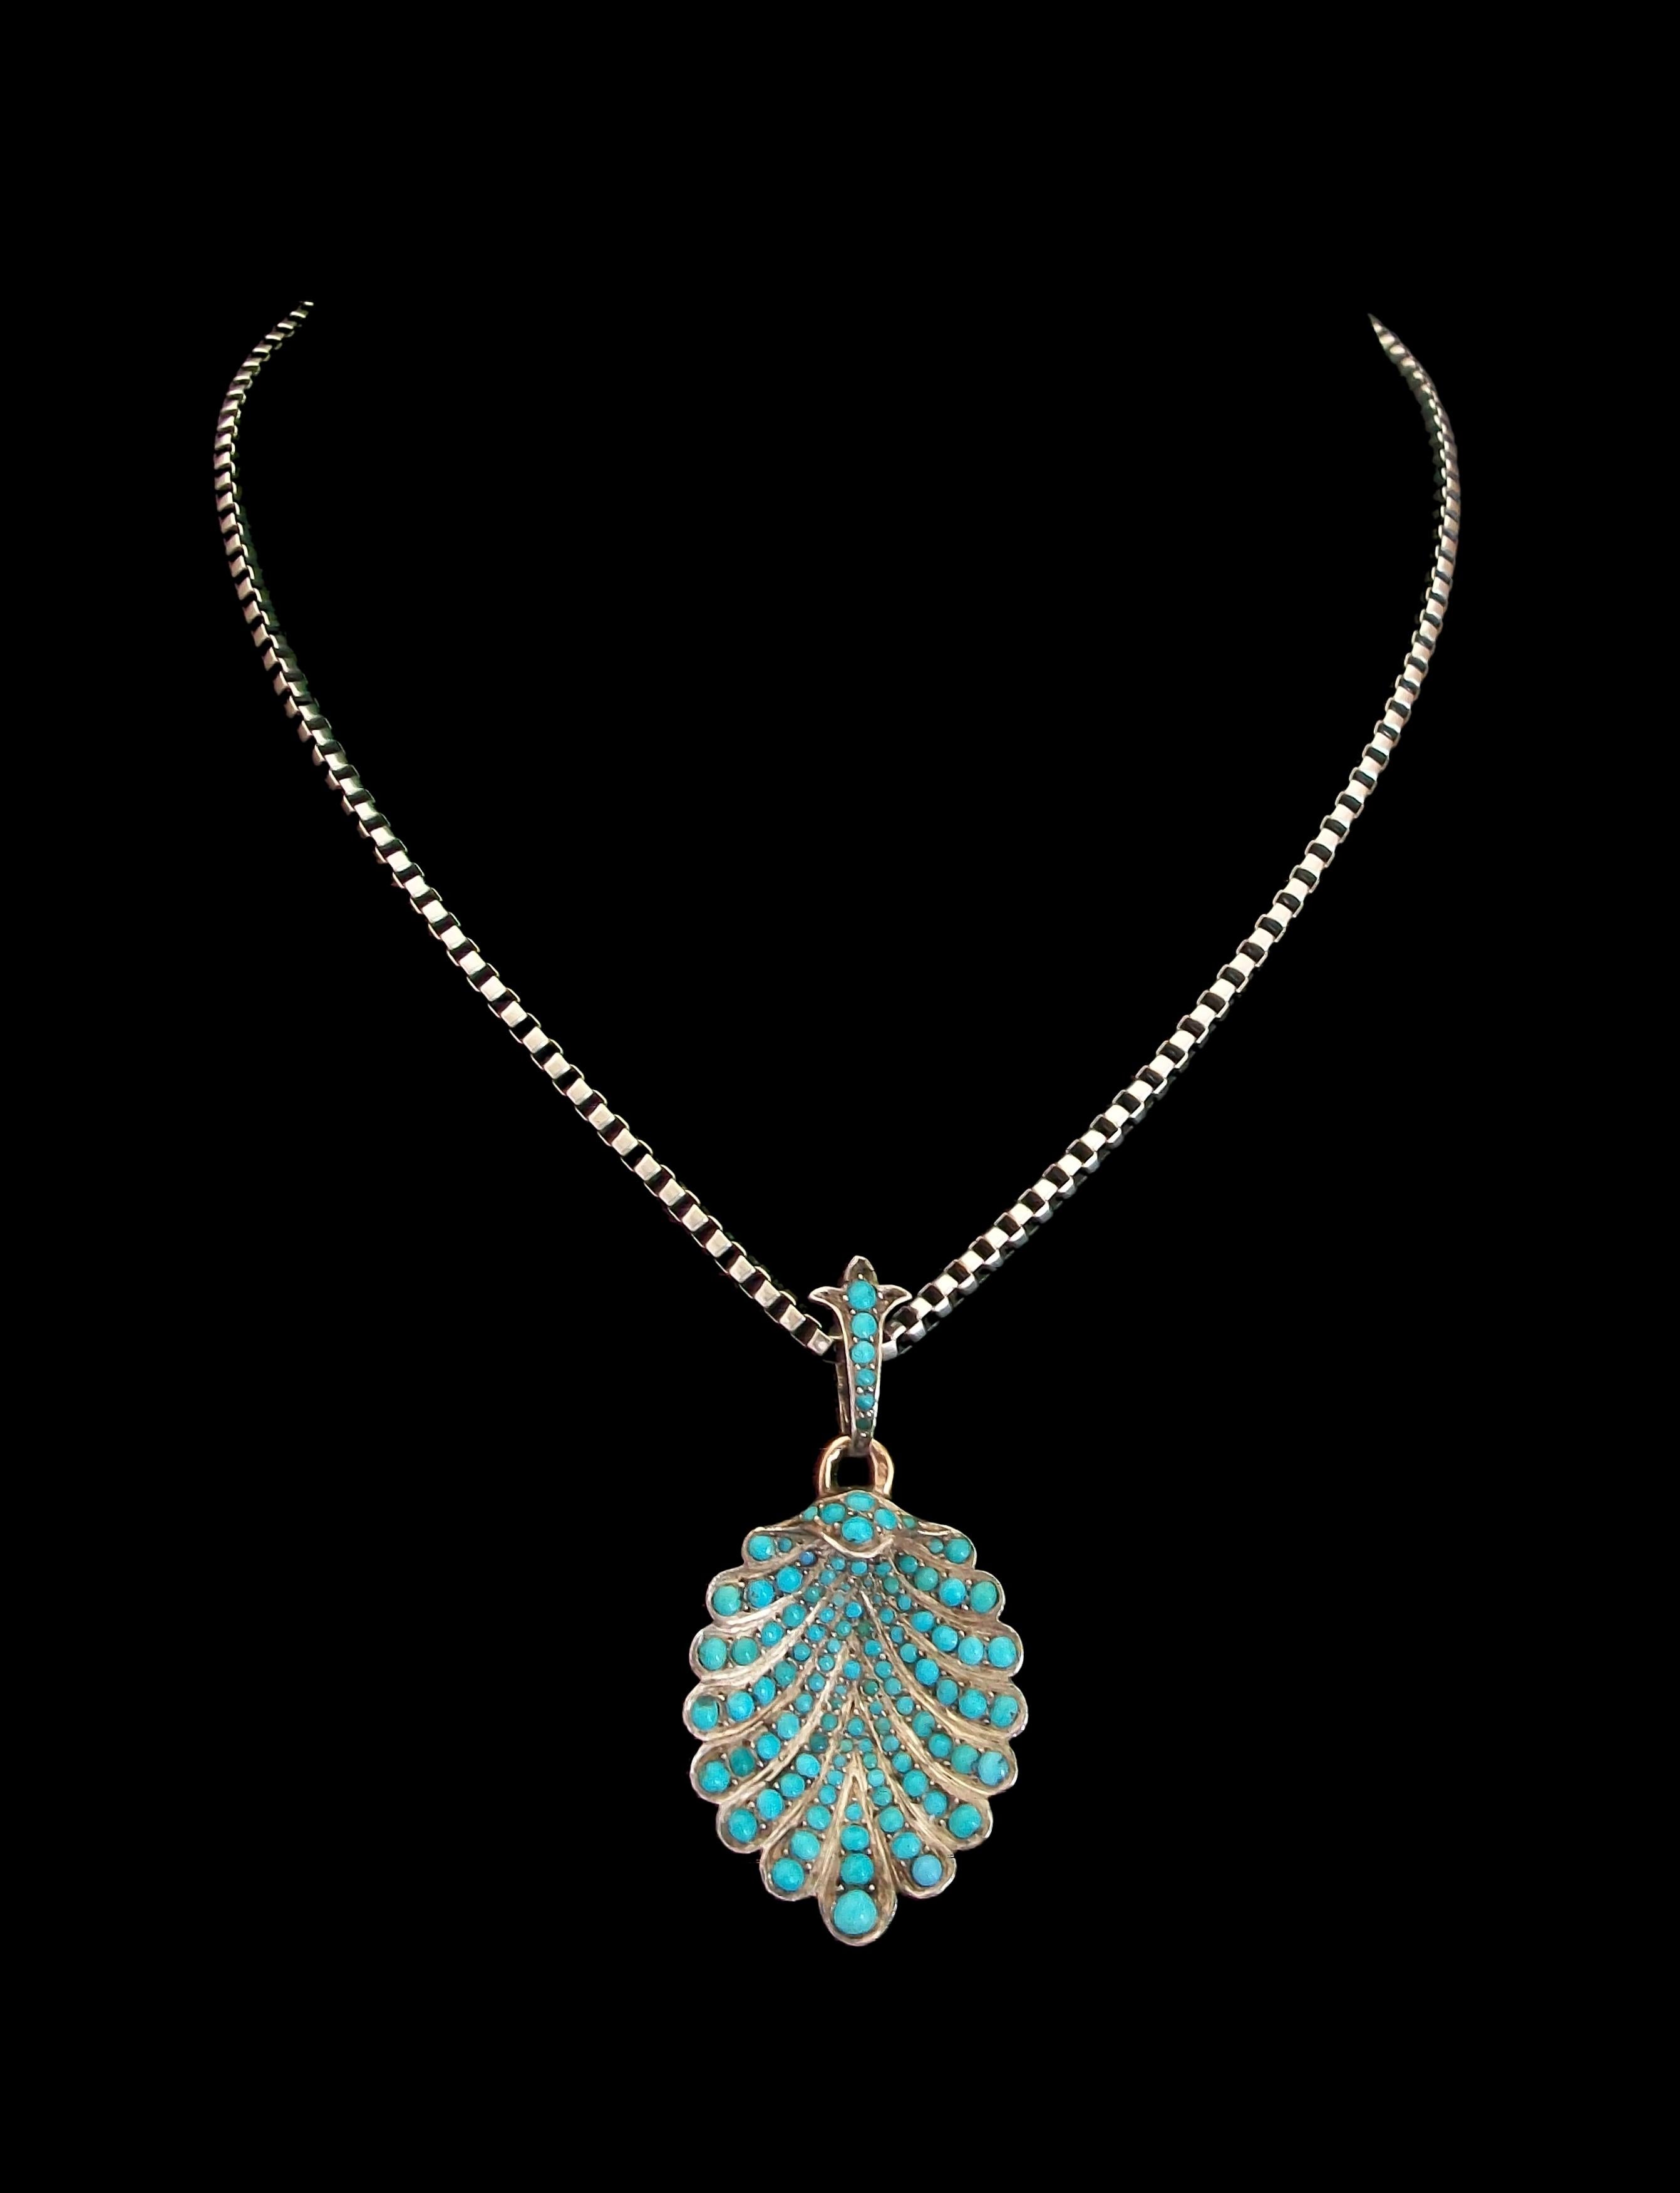 Antique Napoleon III pavé set cabochon Persian turquoise scallop shell necklace pendant set in silver - the scallop shell mounted from a fleur-de-lis bale - both with elaborate tooled details and graduating natural turquoise beads (well matched for